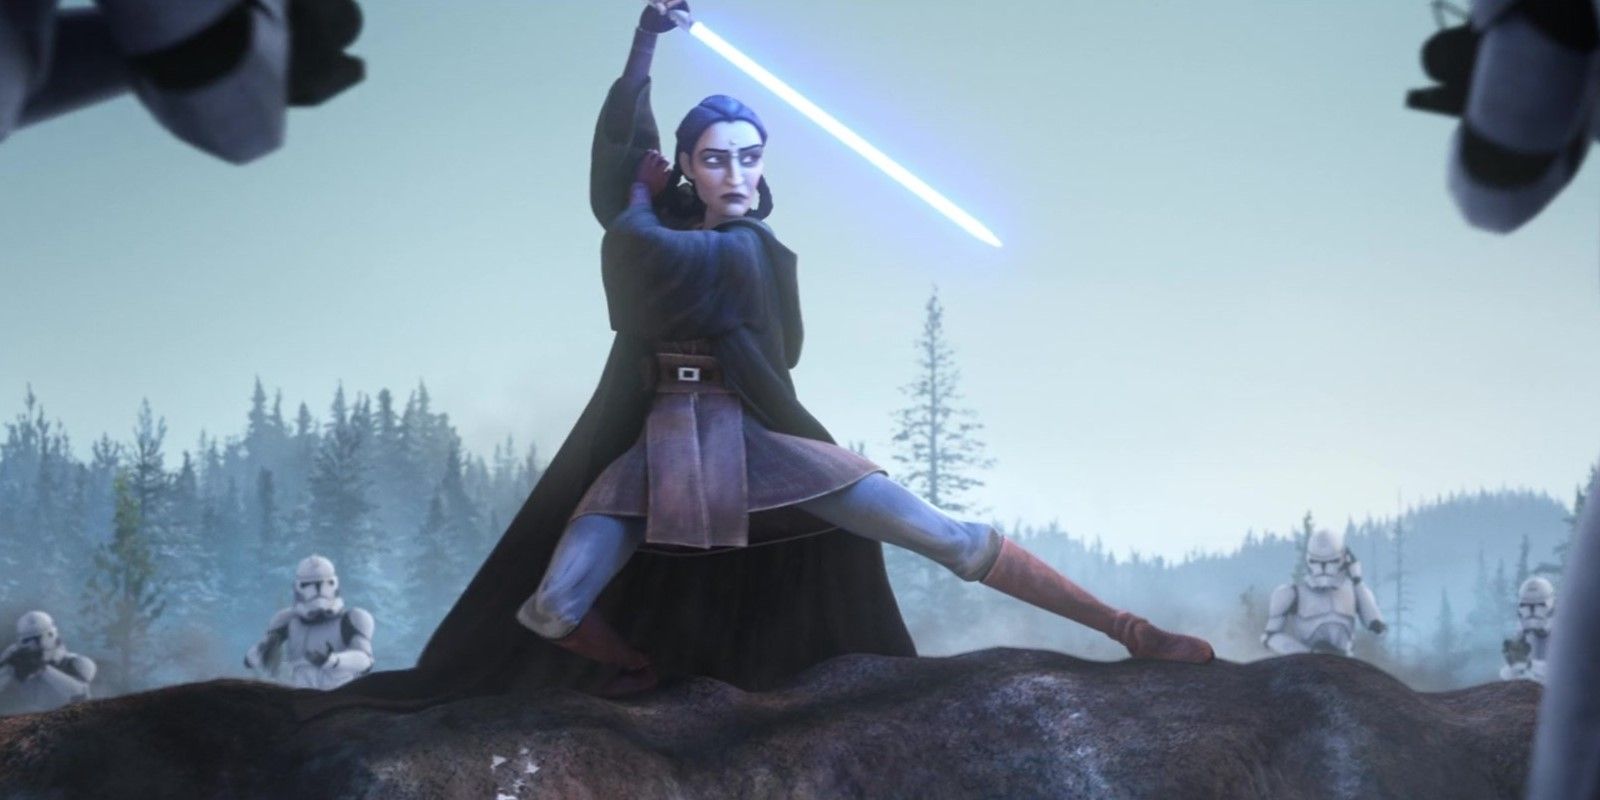 Jedi Master Depa Billaba holds up her blue lightsaber while surrounded by clones executing Order 66 in Star Wars: The Bad Batch season 1 episode 1